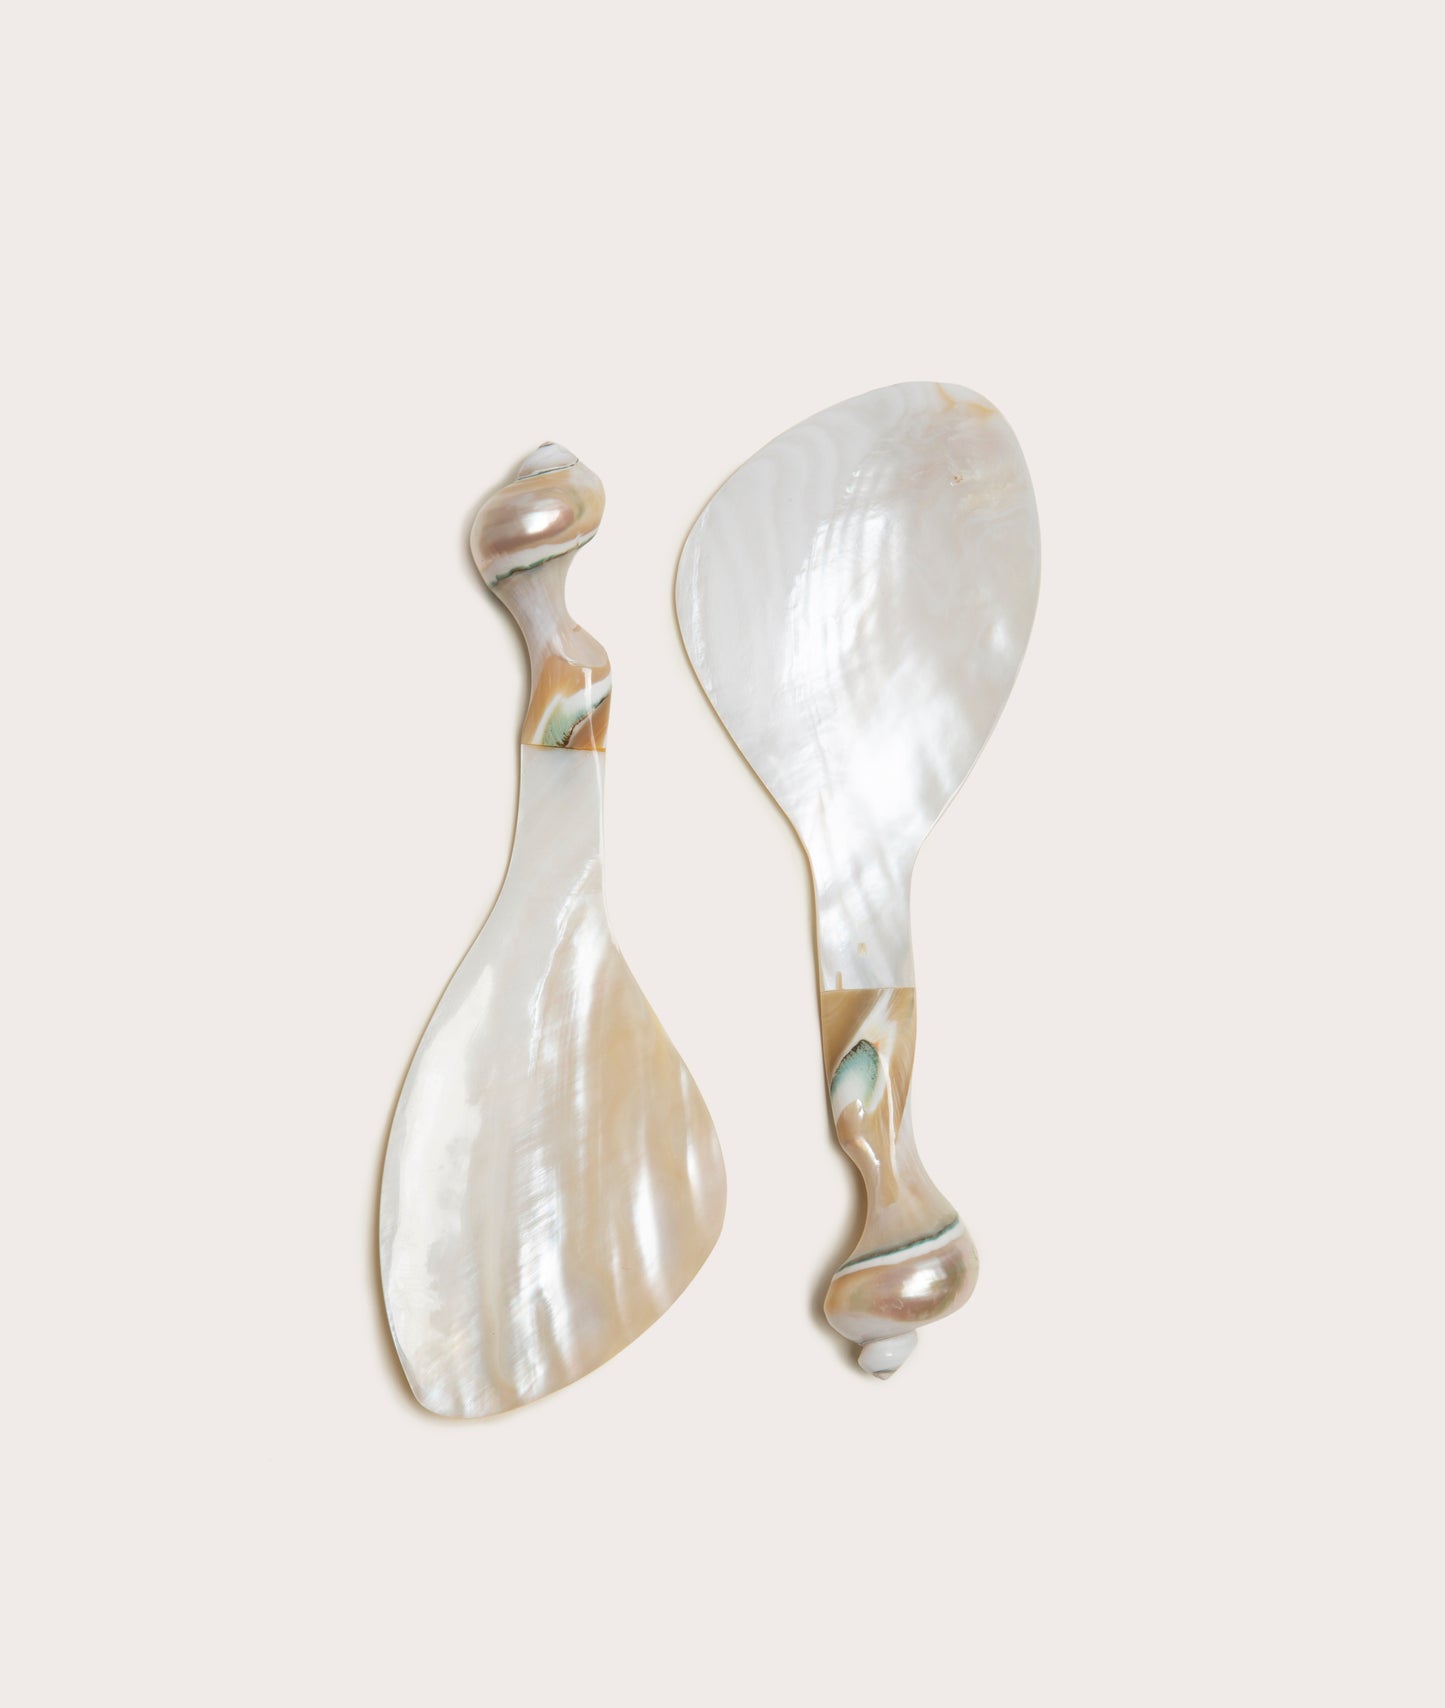 Salad Servers, Mother of Pearl Shell